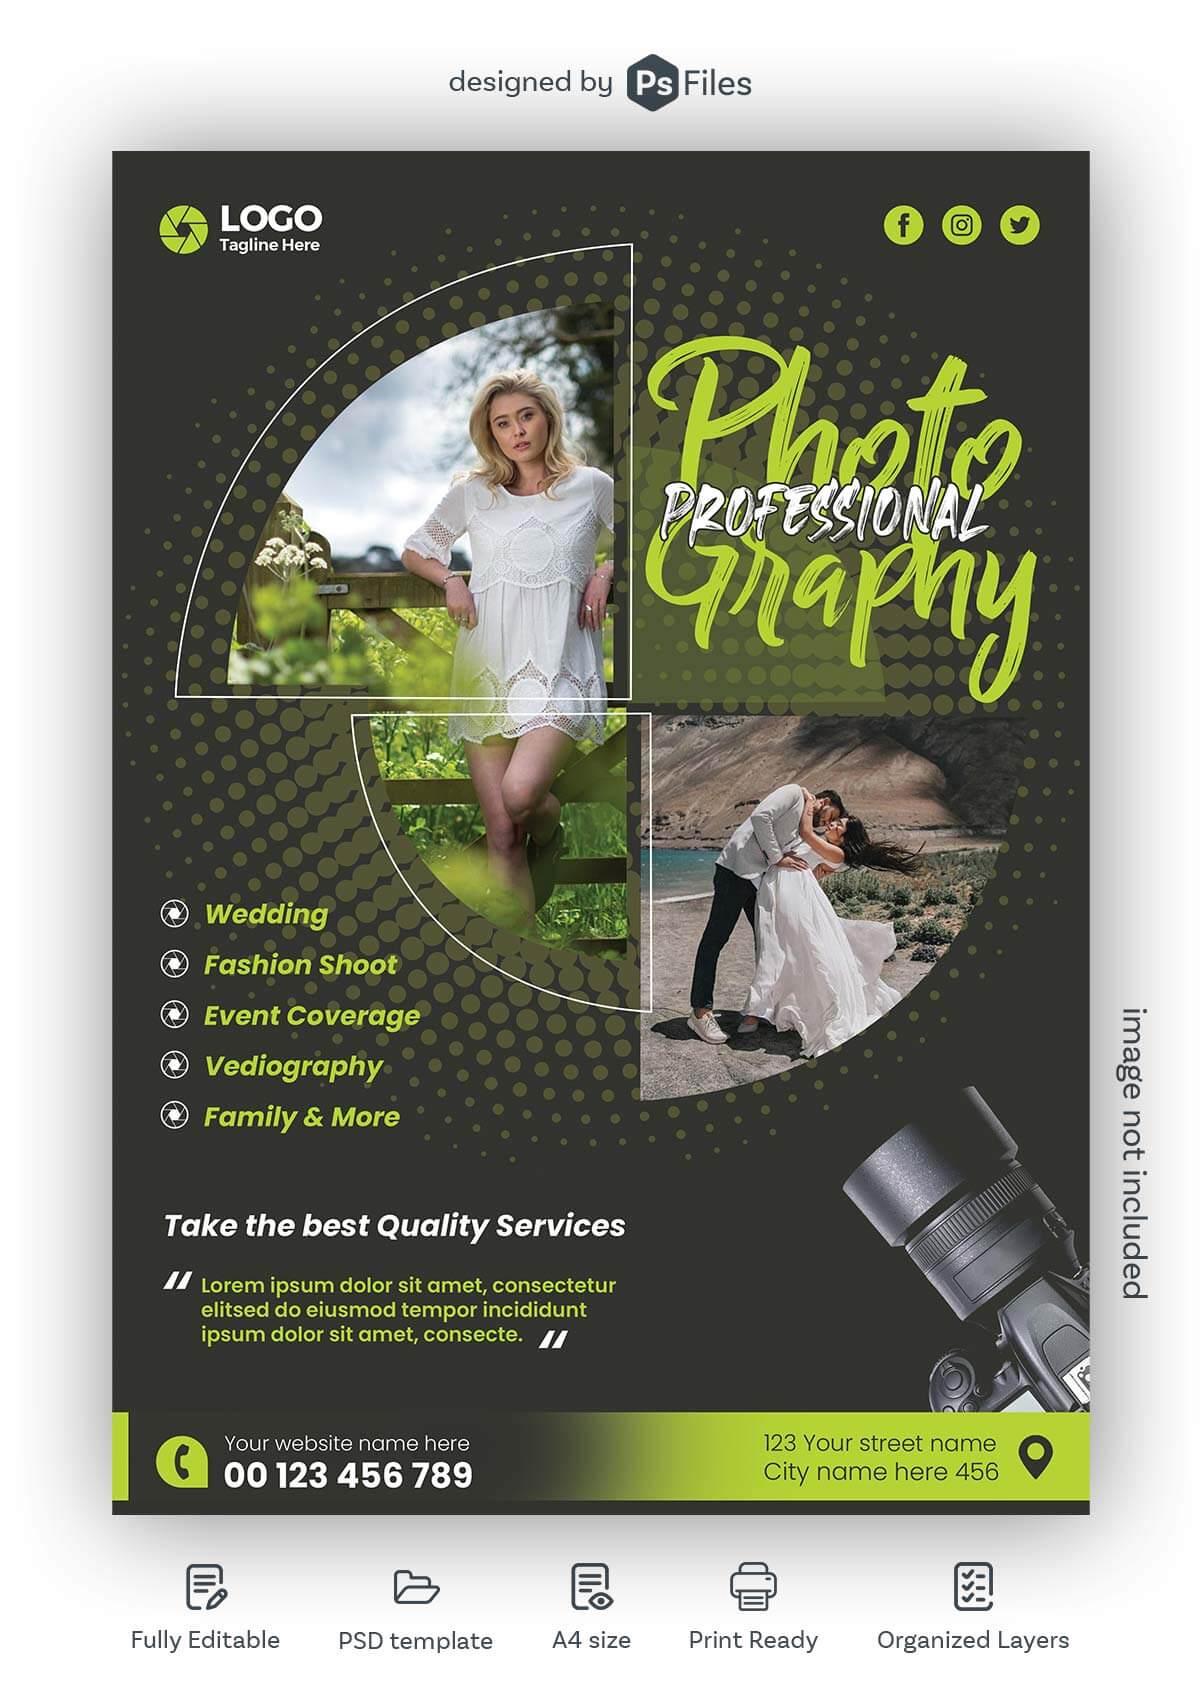 Creative and Free Professional Photography Flyer Design PSD Templates